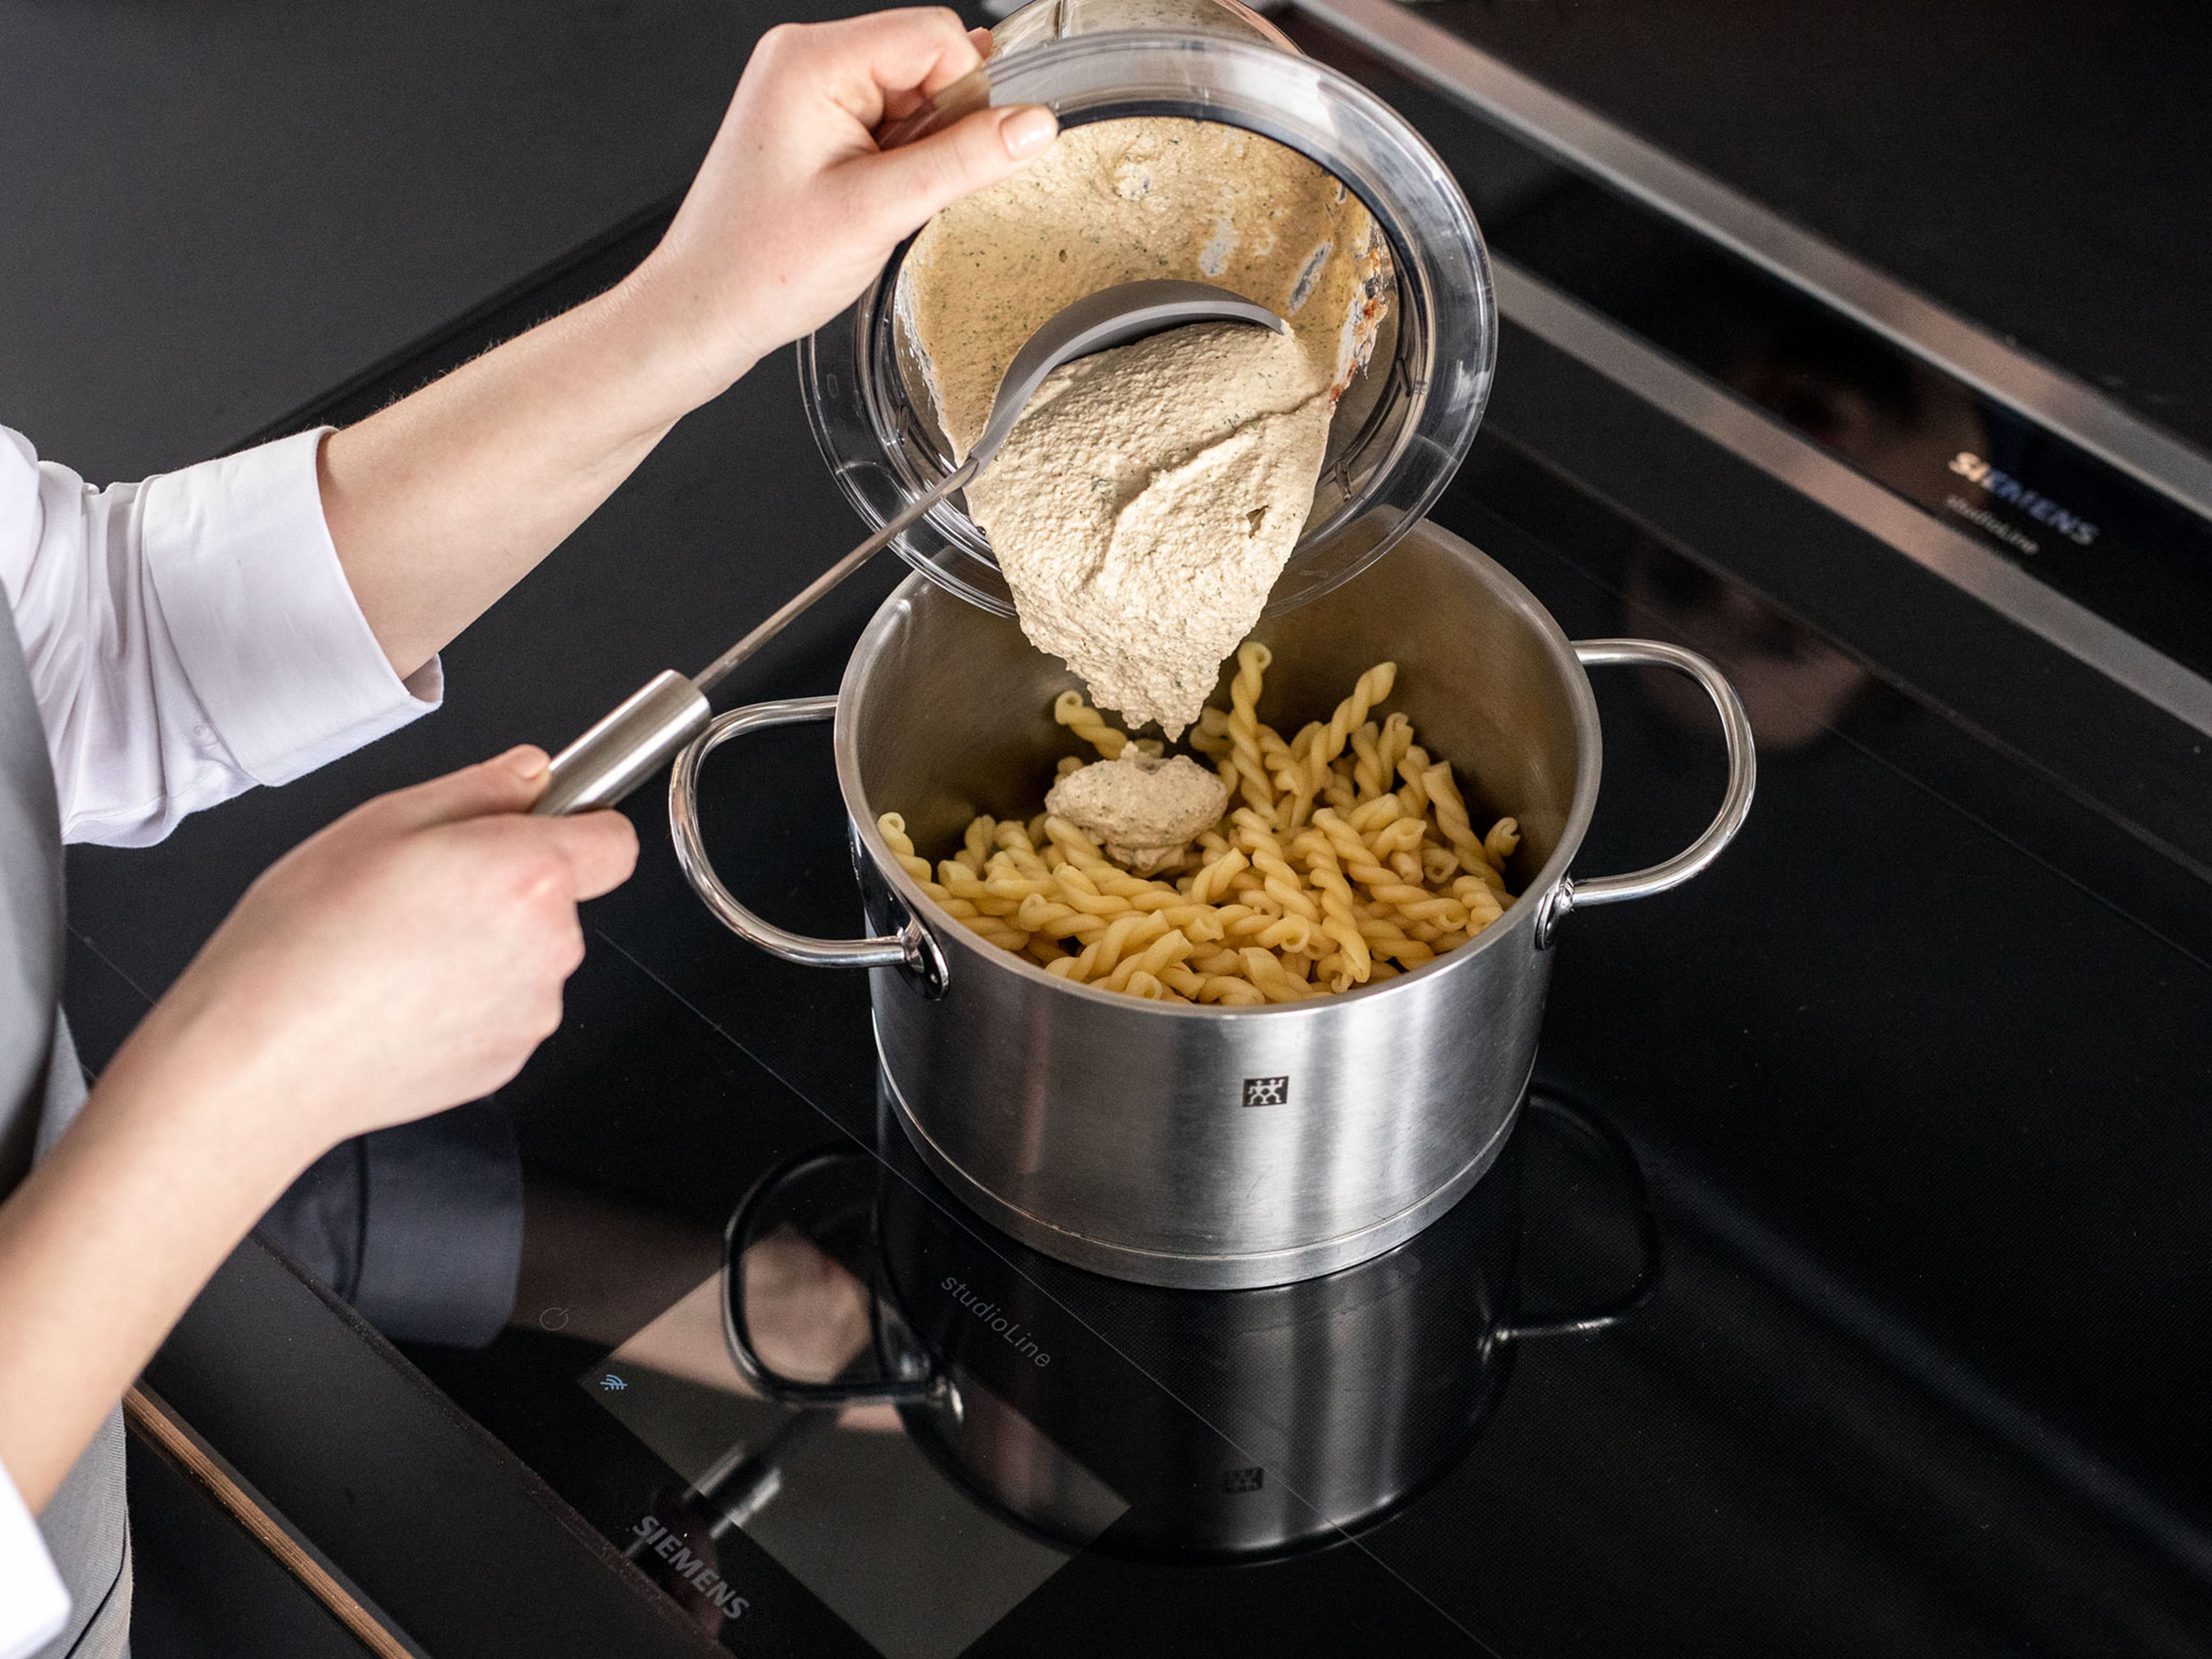 Fill a pot with water and bring to boil. Cook the pasta al dente according to the package instructions. Drain and put the pasta back into the pot. Mix well with the walnut-ricotta pesto. Enjoy!